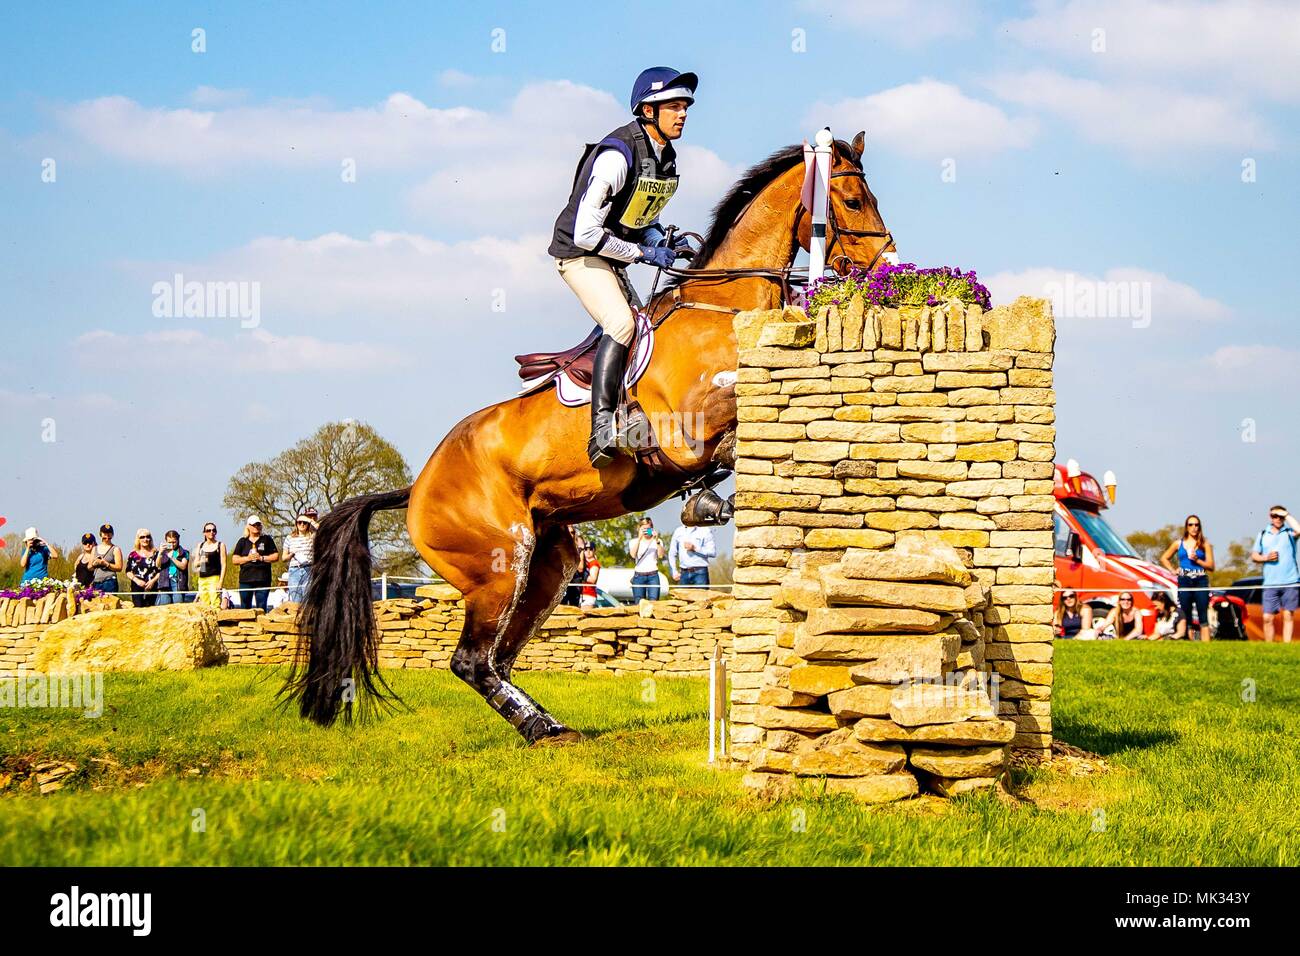 Cross Country. William Coleman. Obos O'Reilly. USA. Horsequest Quarry. Fence 4. Mitsubishi Badminton Horse Trials. Badminton. UK.  05/05/2018. Stock Photo